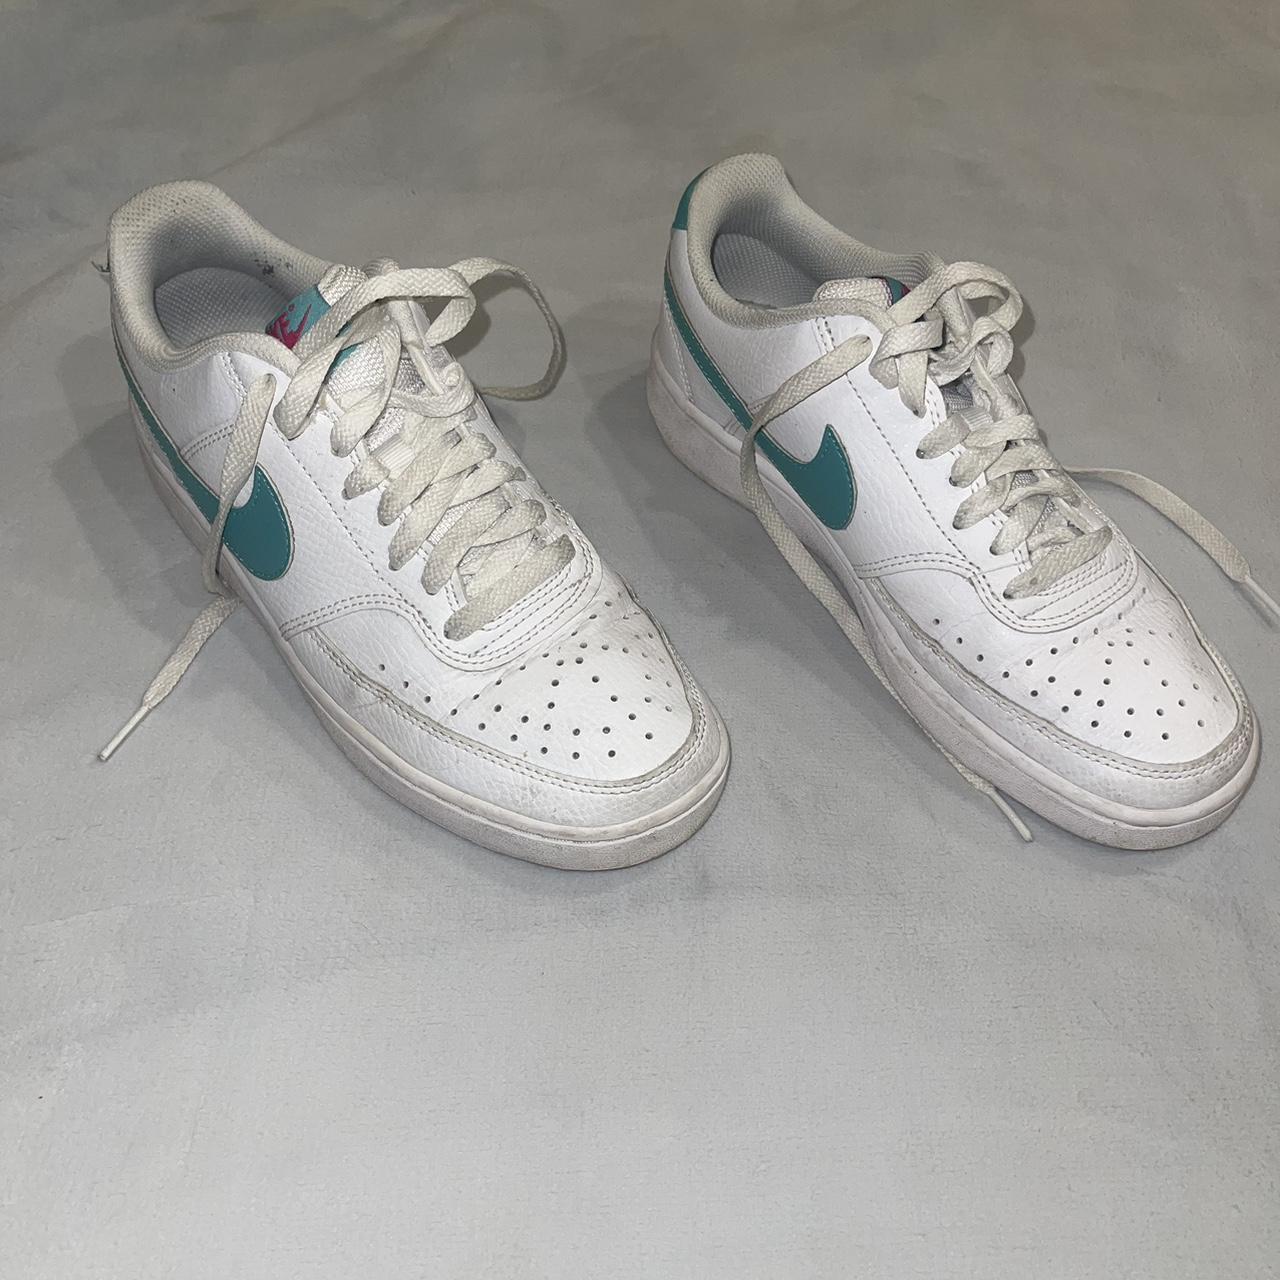 Teal on White Nike Low Court Vision Dunks 5.5 in... - Depop